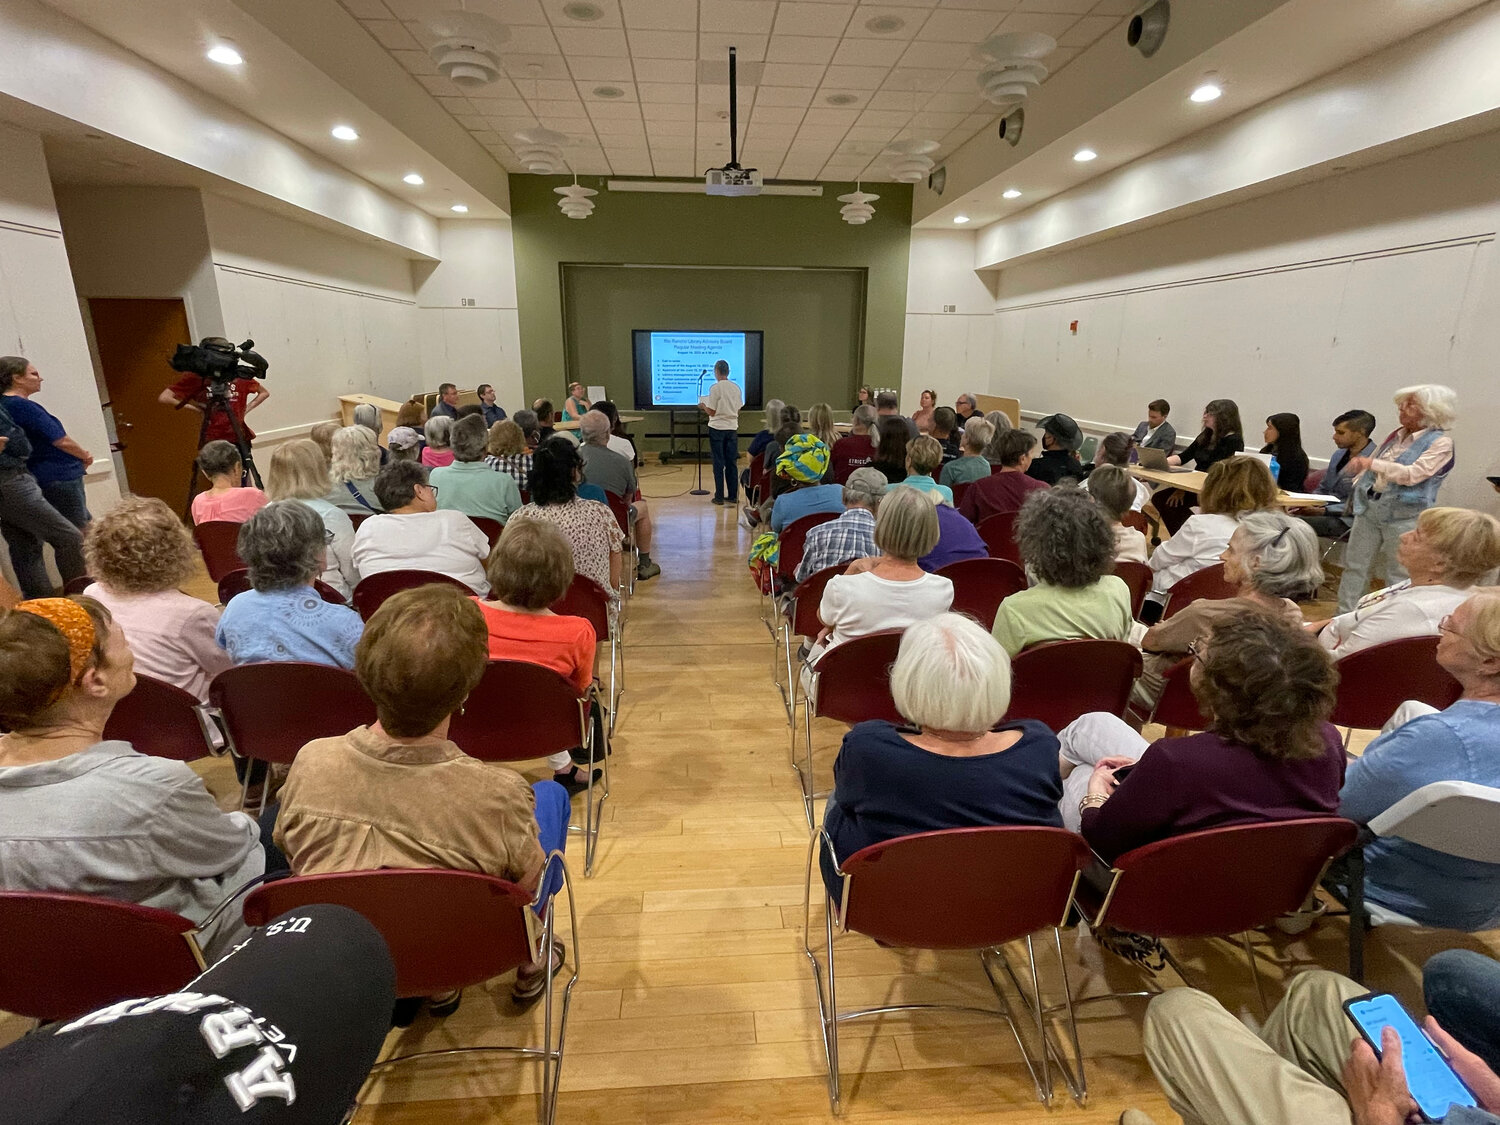 Over 100 people attended a meeting to discuss banning books in the Rio Rancho Public Libraries.